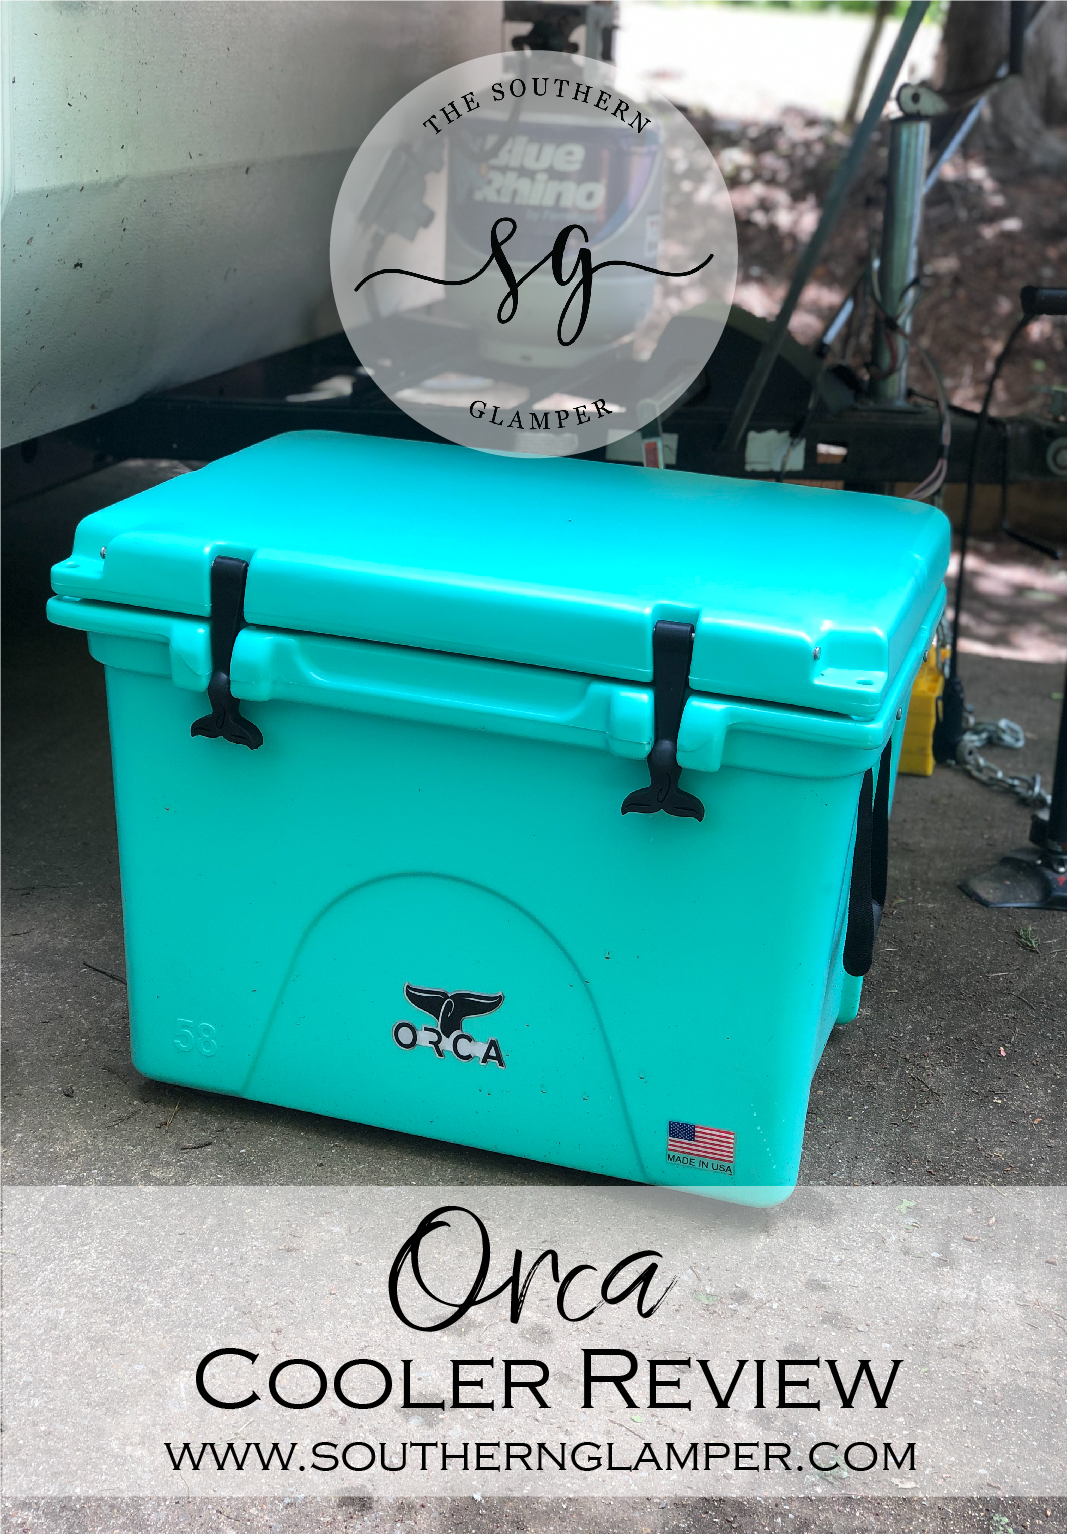 Orca Classic Cooler, 58 quarts review: Whale, whaddaya know, Orca's  king-size cooler is terrific - CNET